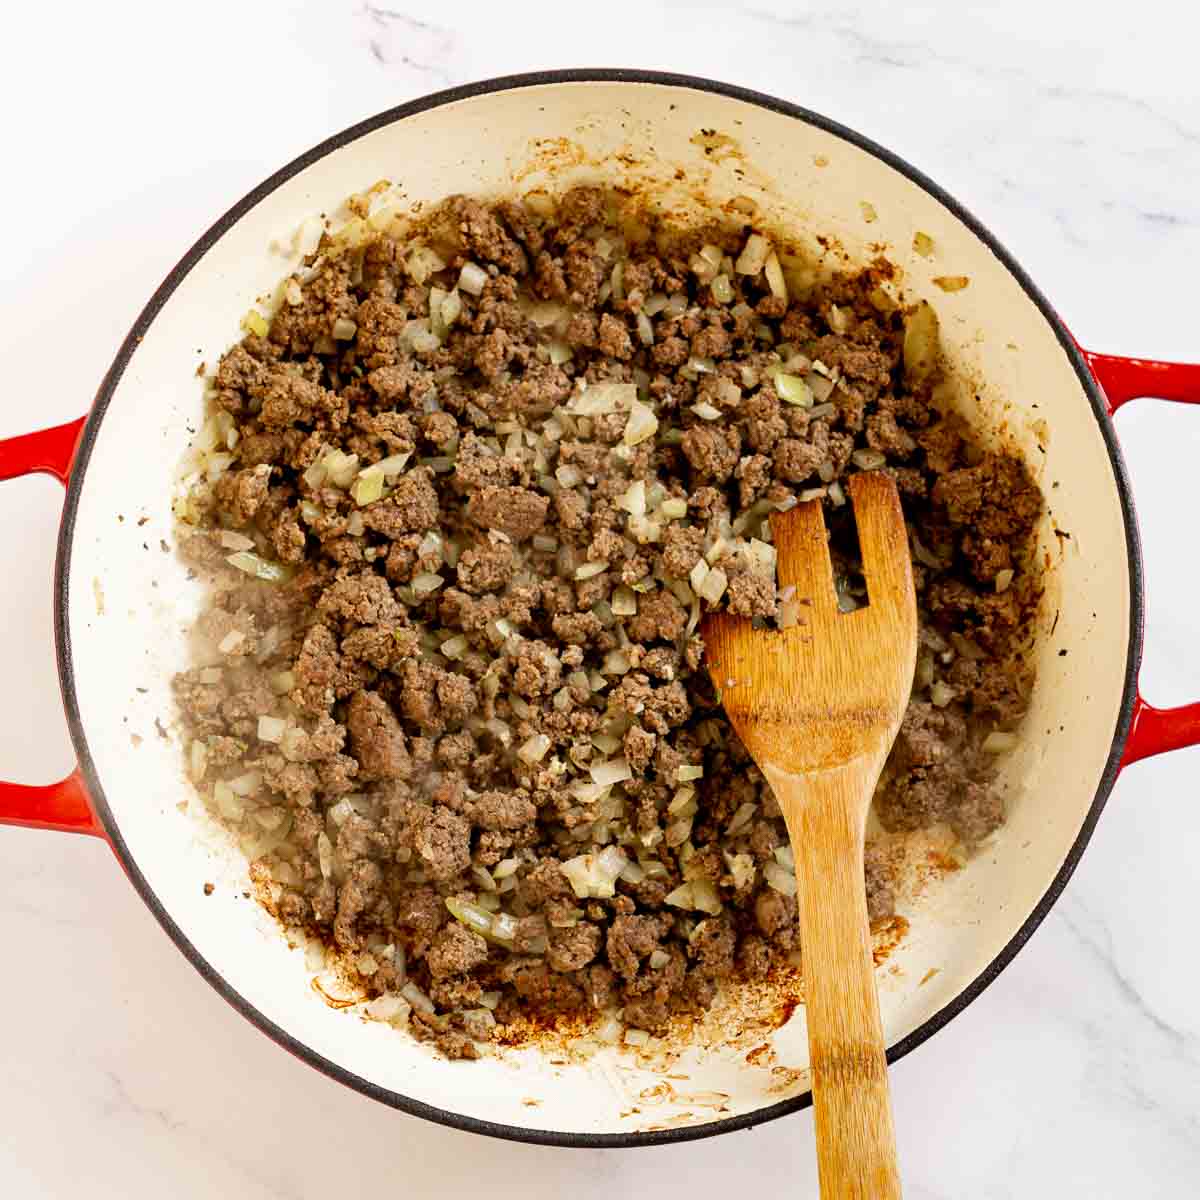 Diced onion sauteed with ground beef in a pan